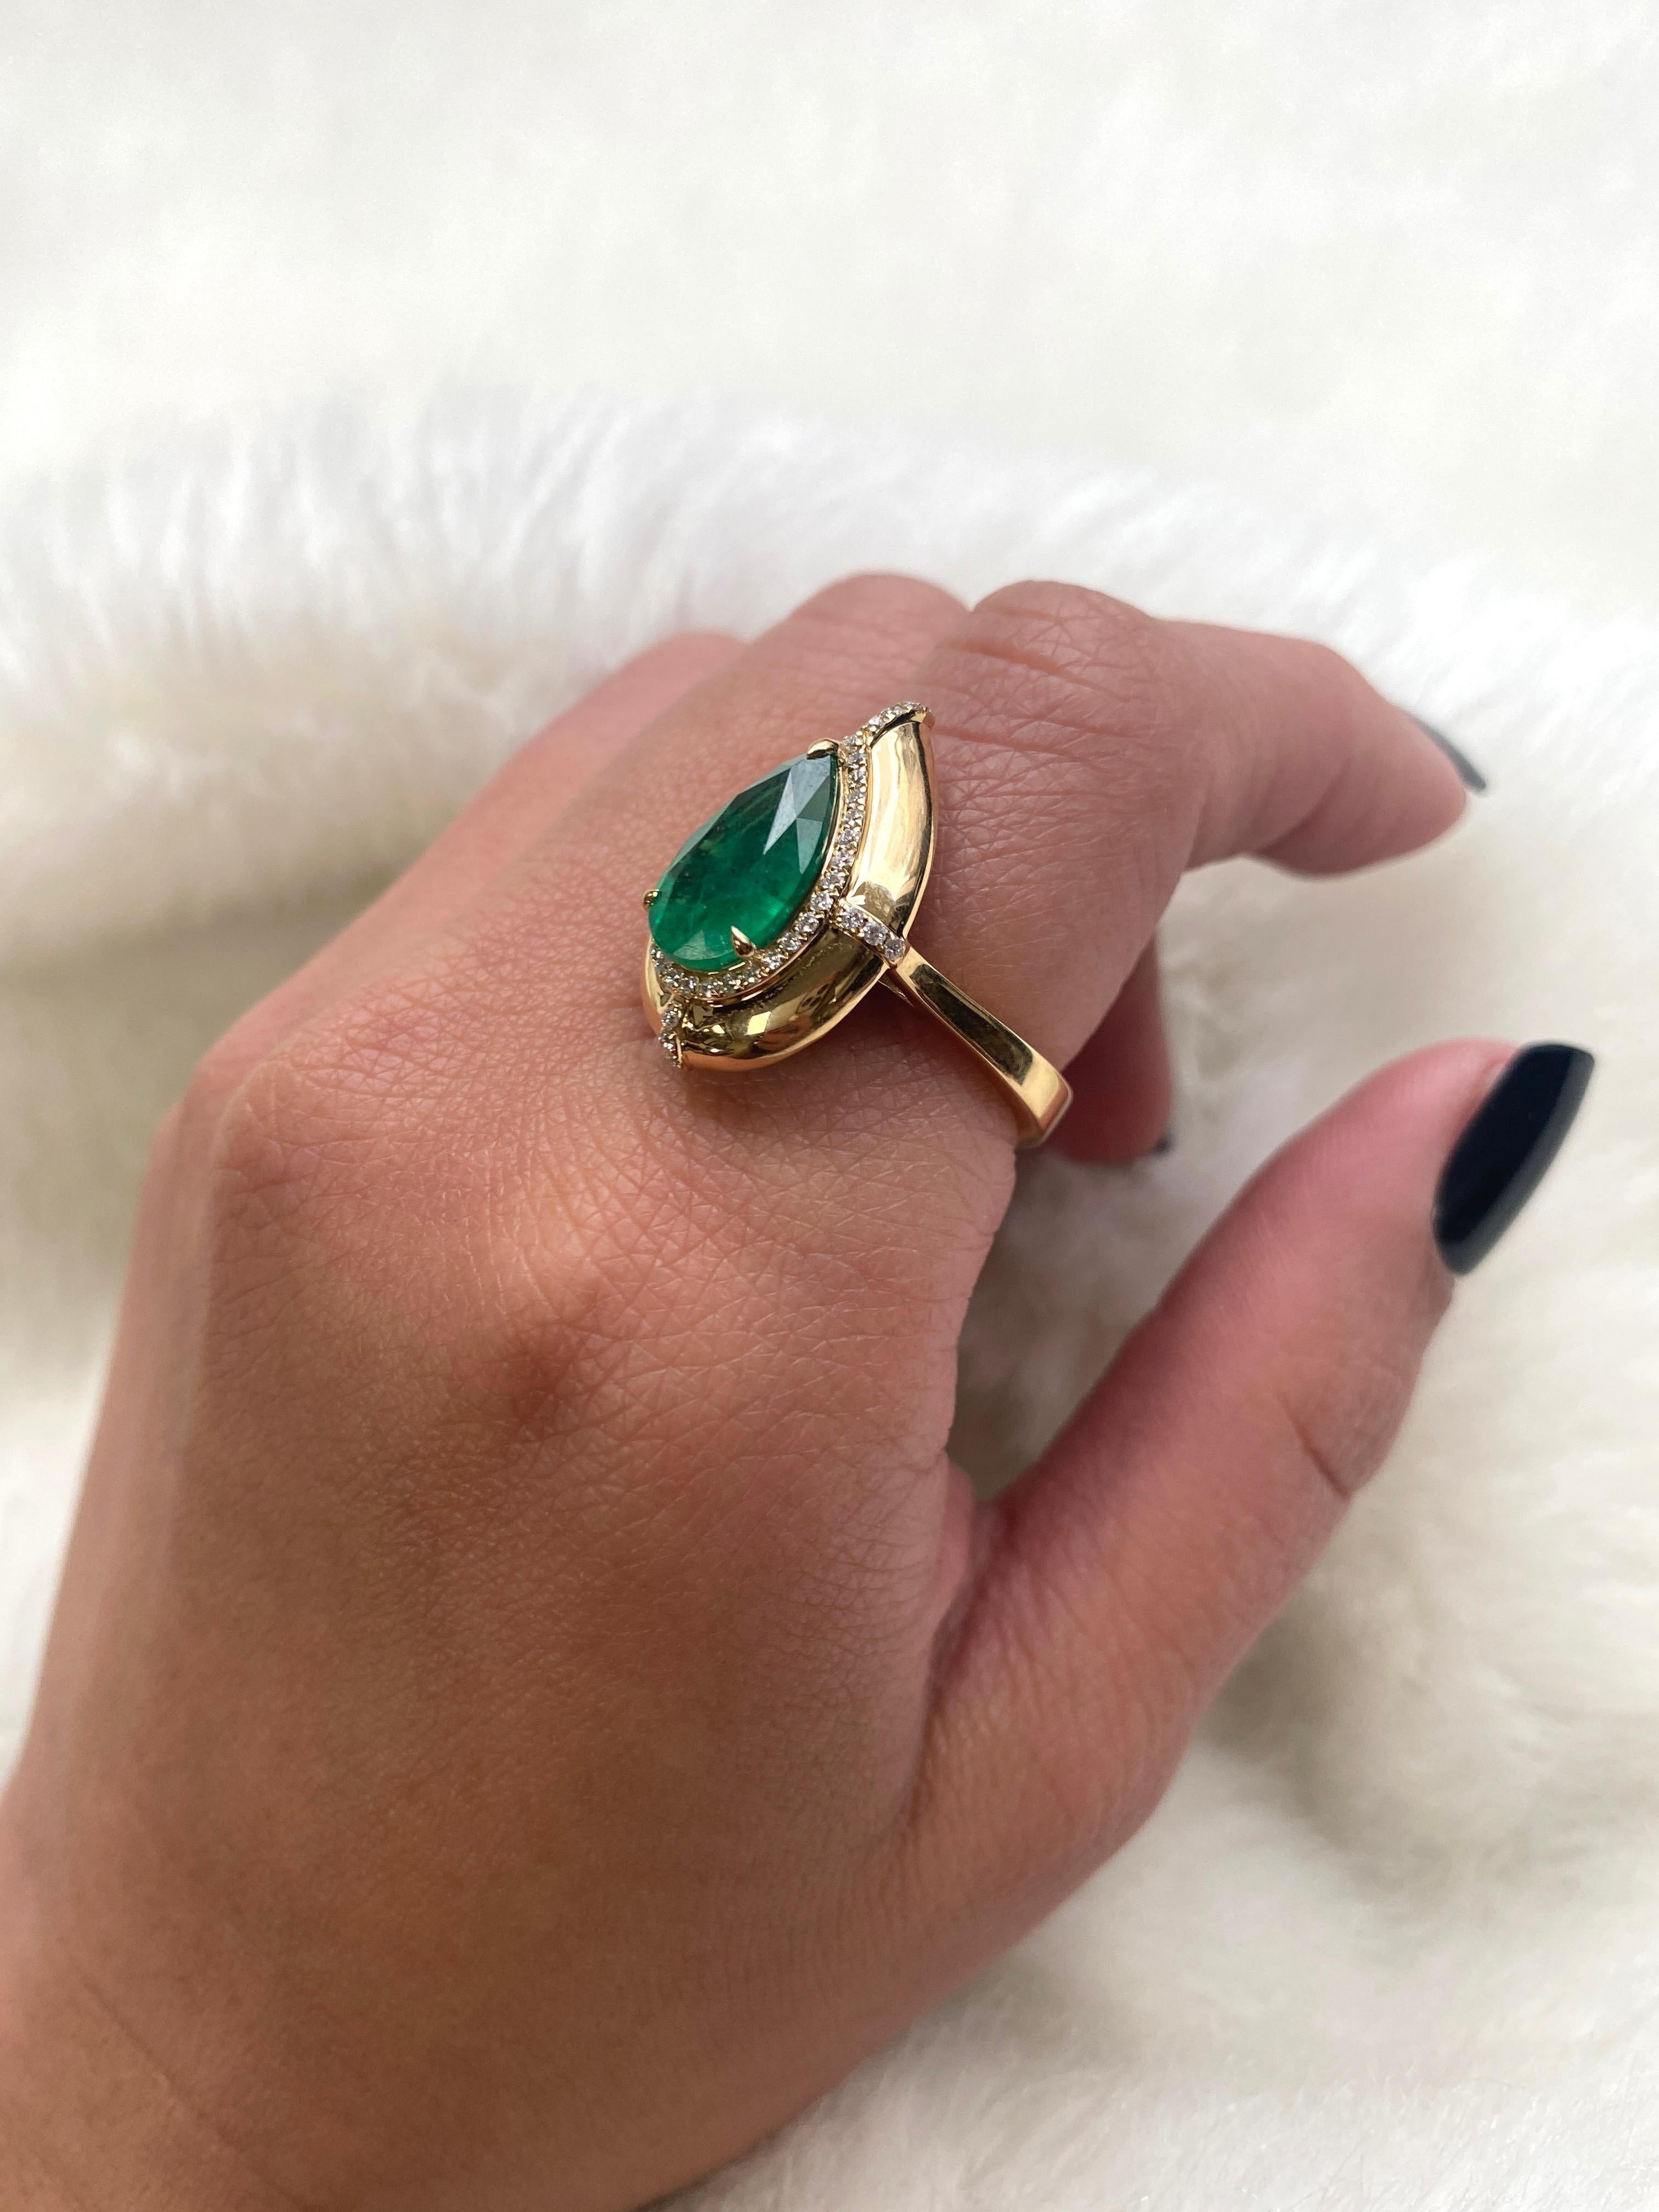 Unique Pear Shape Emerald Cab Ring with Diamonds in 18K Yellow Gold, from 'G-One' Collection. Don't miss the opportunity to add this wonderful piece to your personal collection! You will dazzle even more with it!

* Gemstone size: 12.6 x 8 mm
*